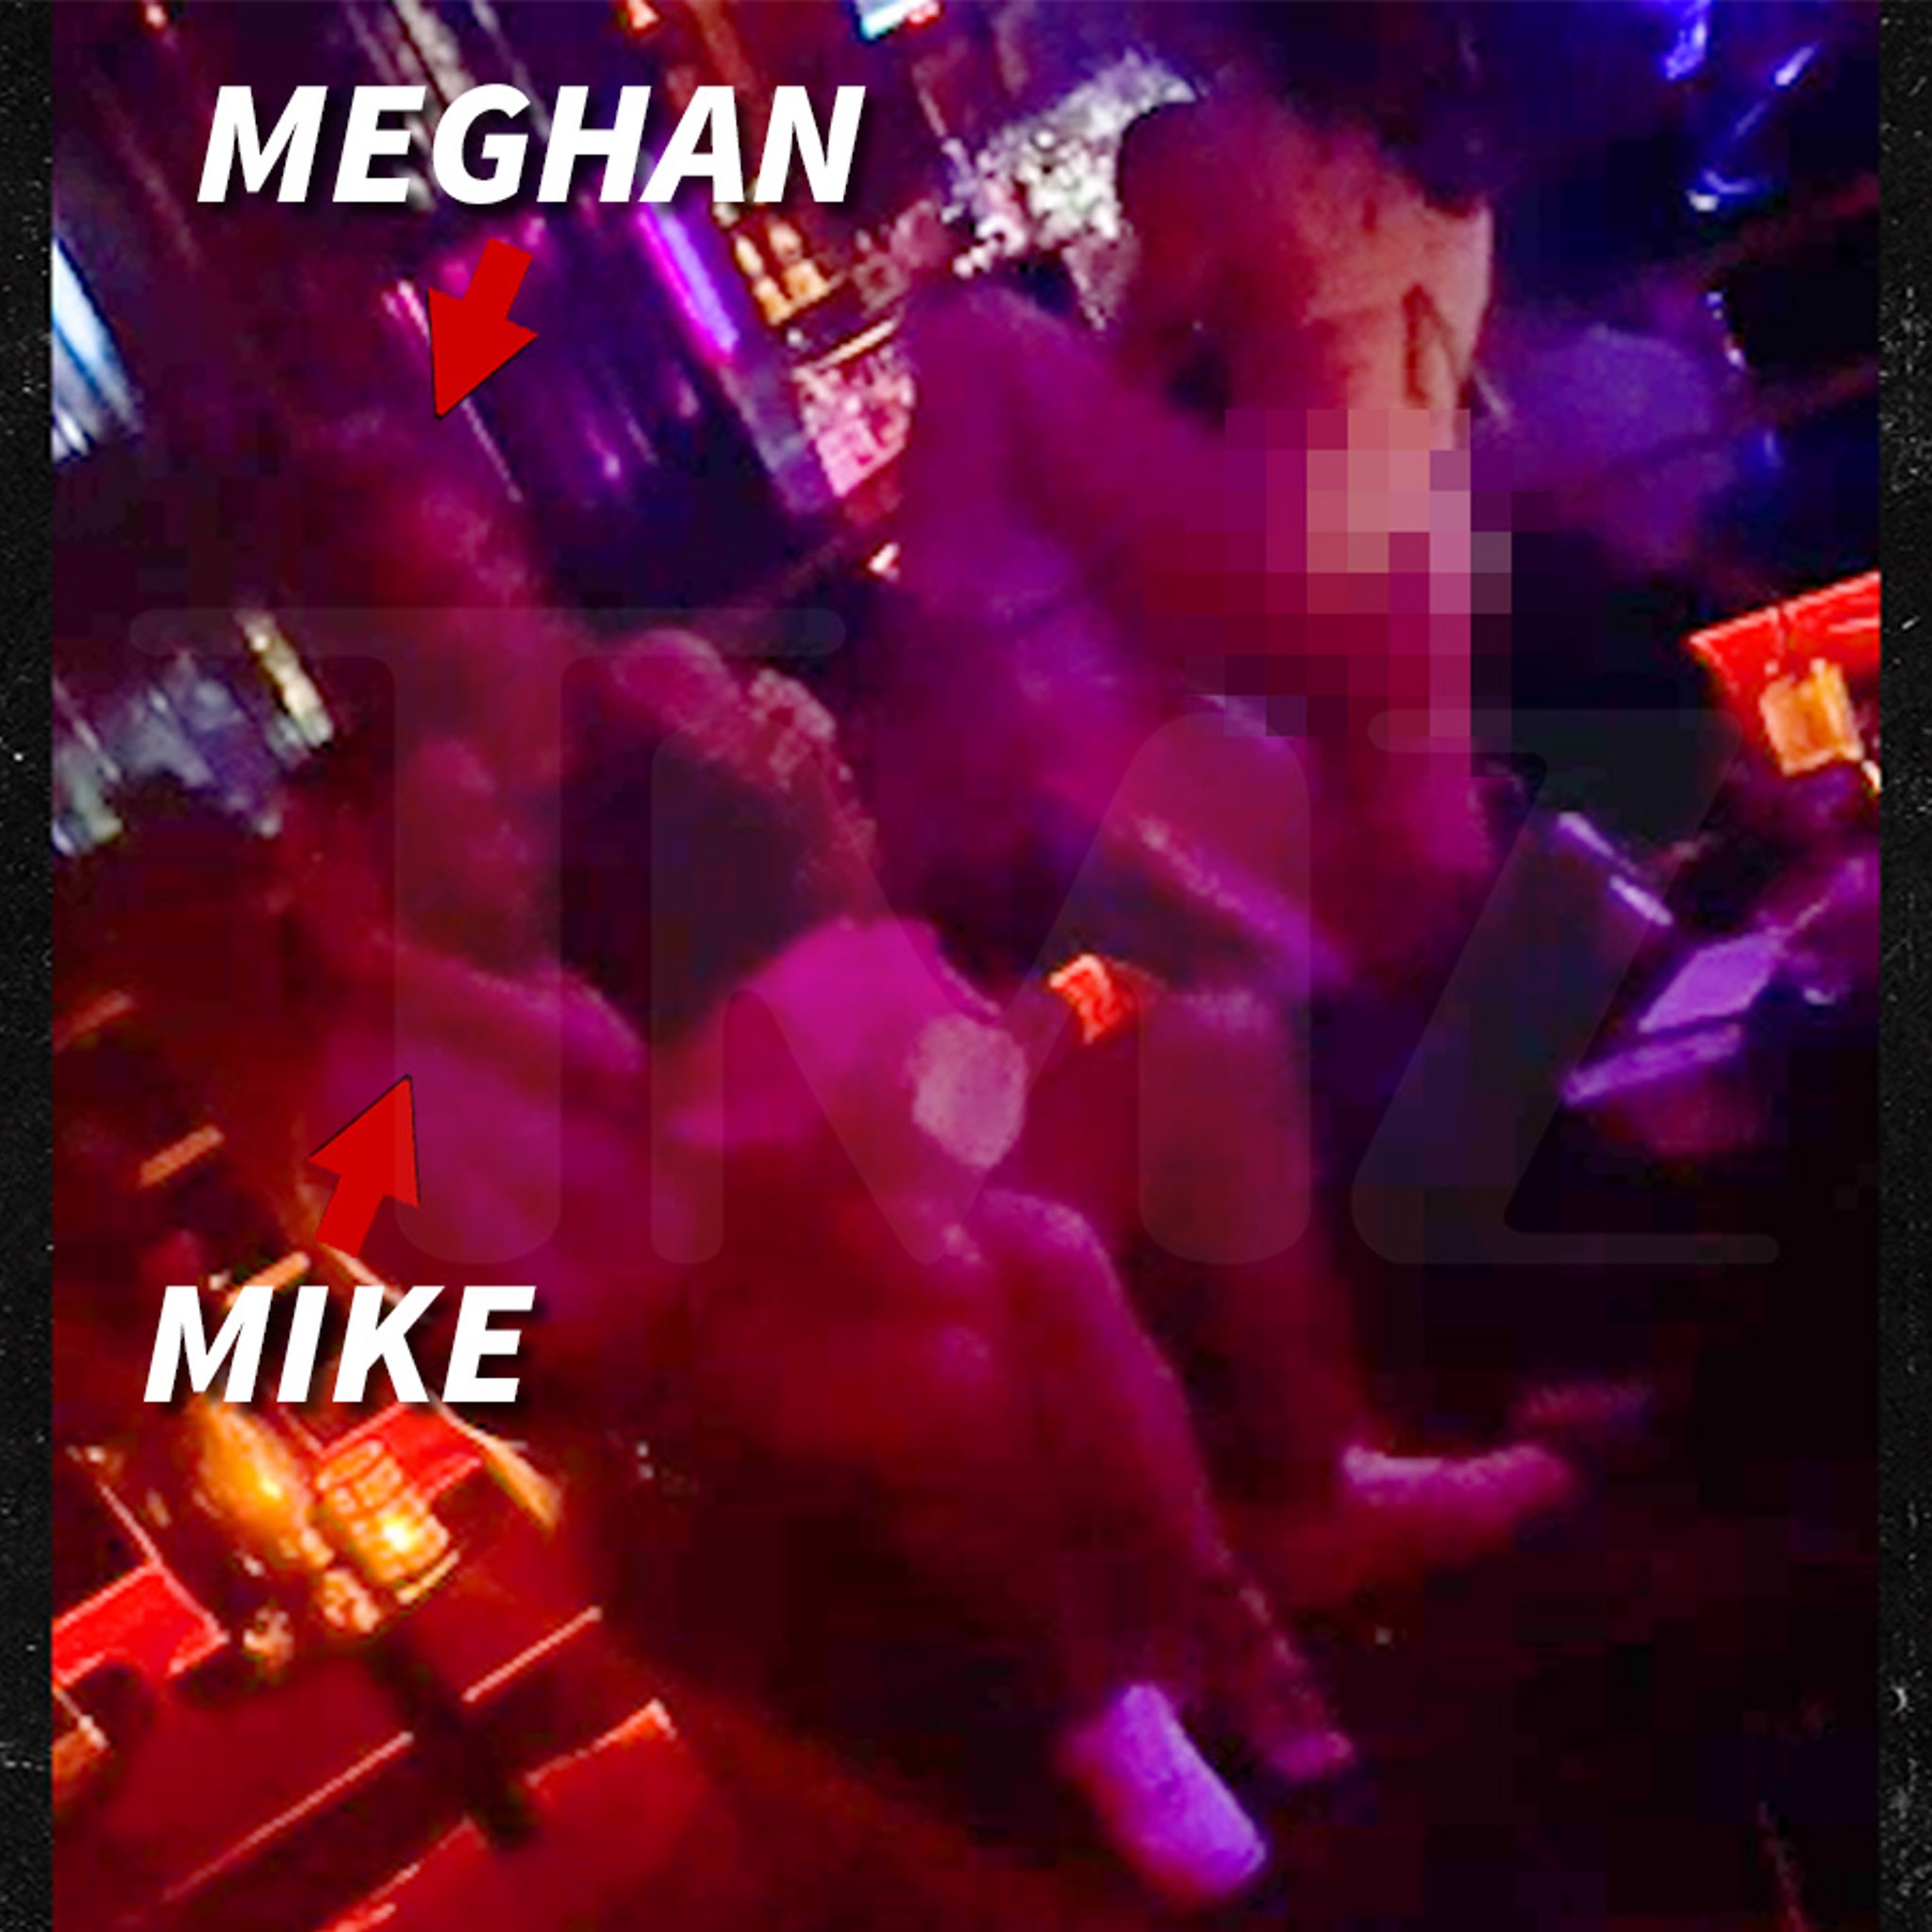 Meghan King's Ex Gets Married After She's Spotted With Mike Johnson